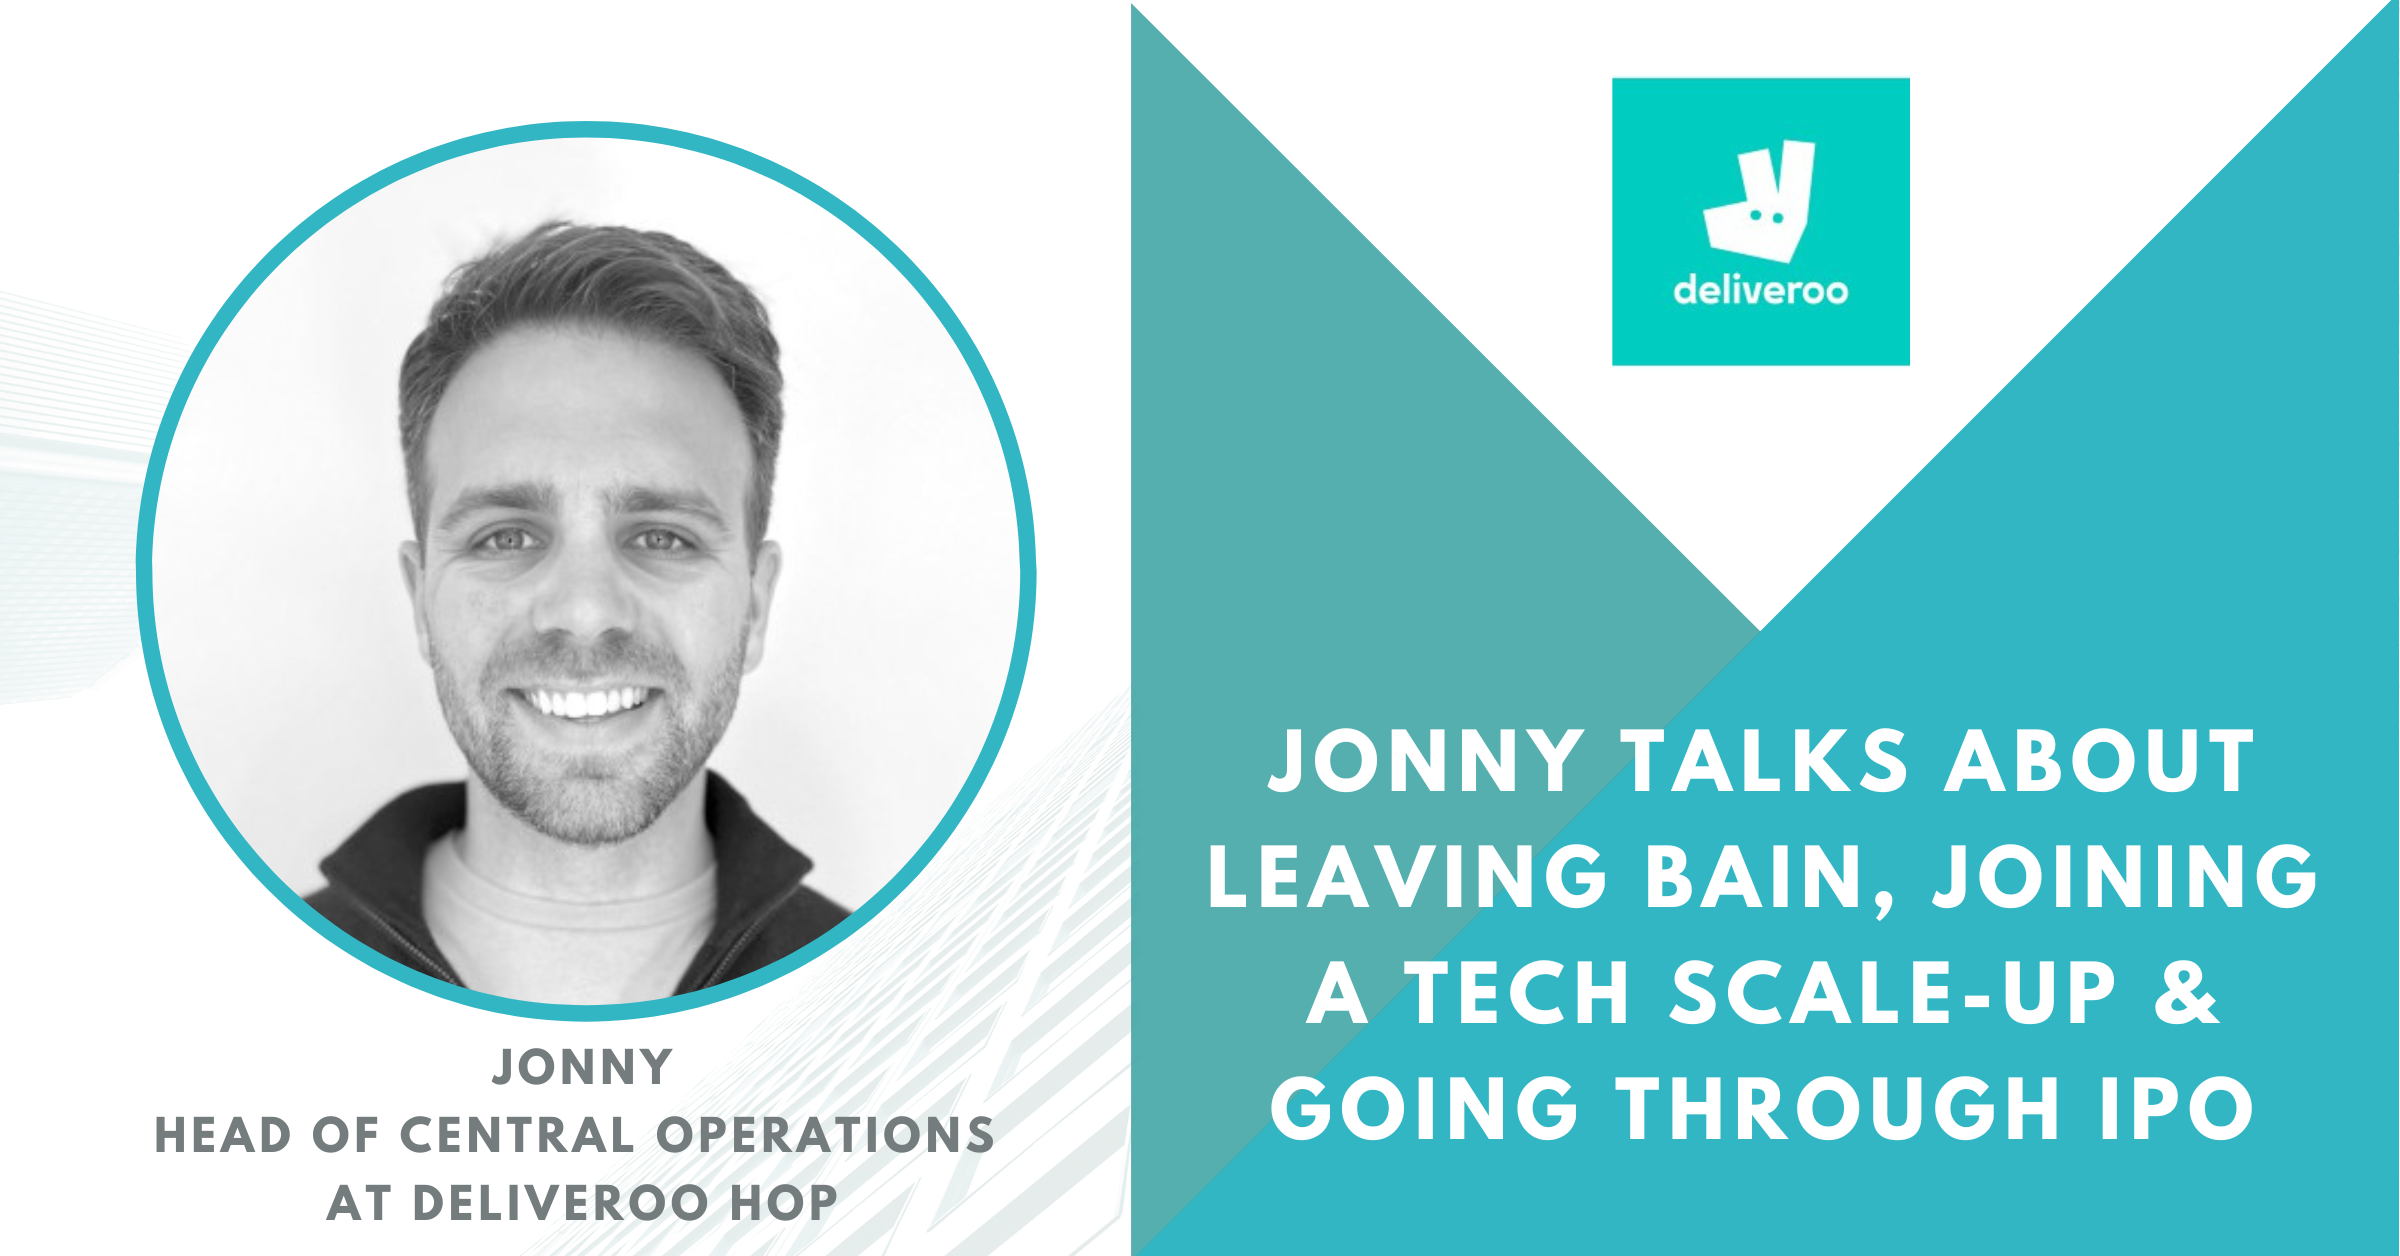 Fireside chat with Rich & Jonny – Leaving consulting, joining a tech scale-up & going through IPO